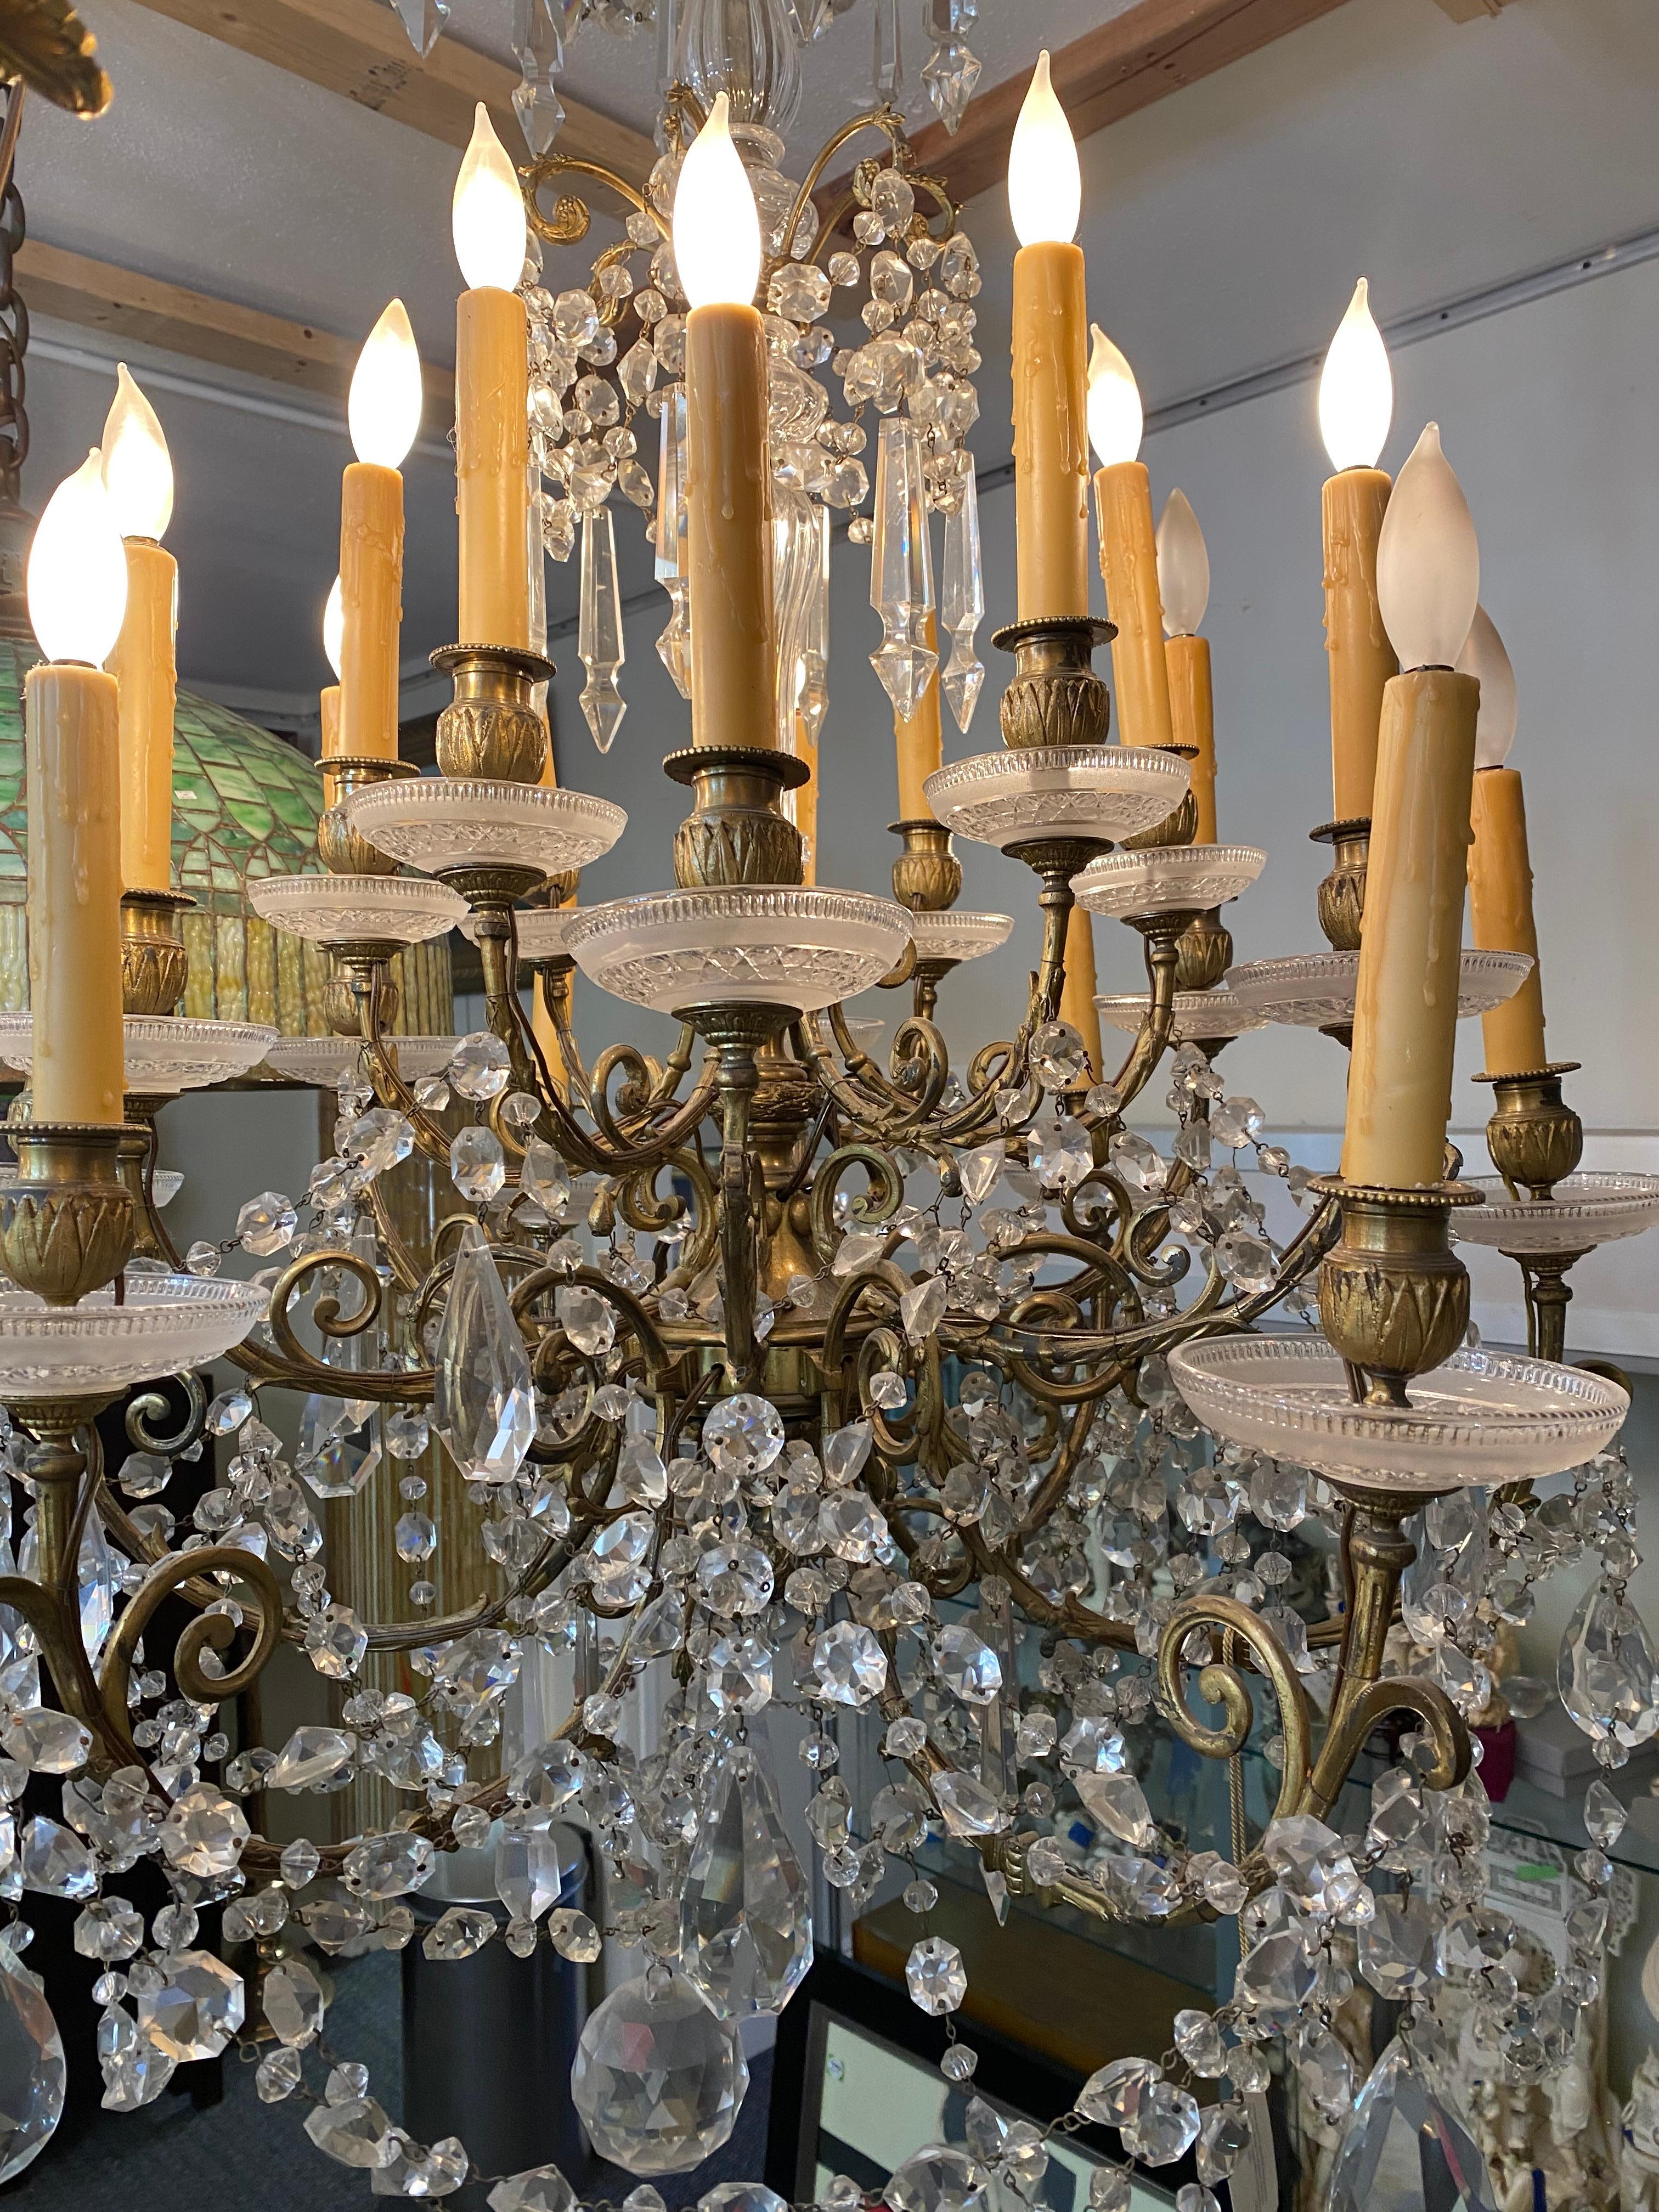 A fine Louis XV style gilt-bronze and cut crystal 18-light chandelier, late
19th century
Measures: Height 48 in. (121.92 cm.),
Width 32 in. (81.28 cm.)